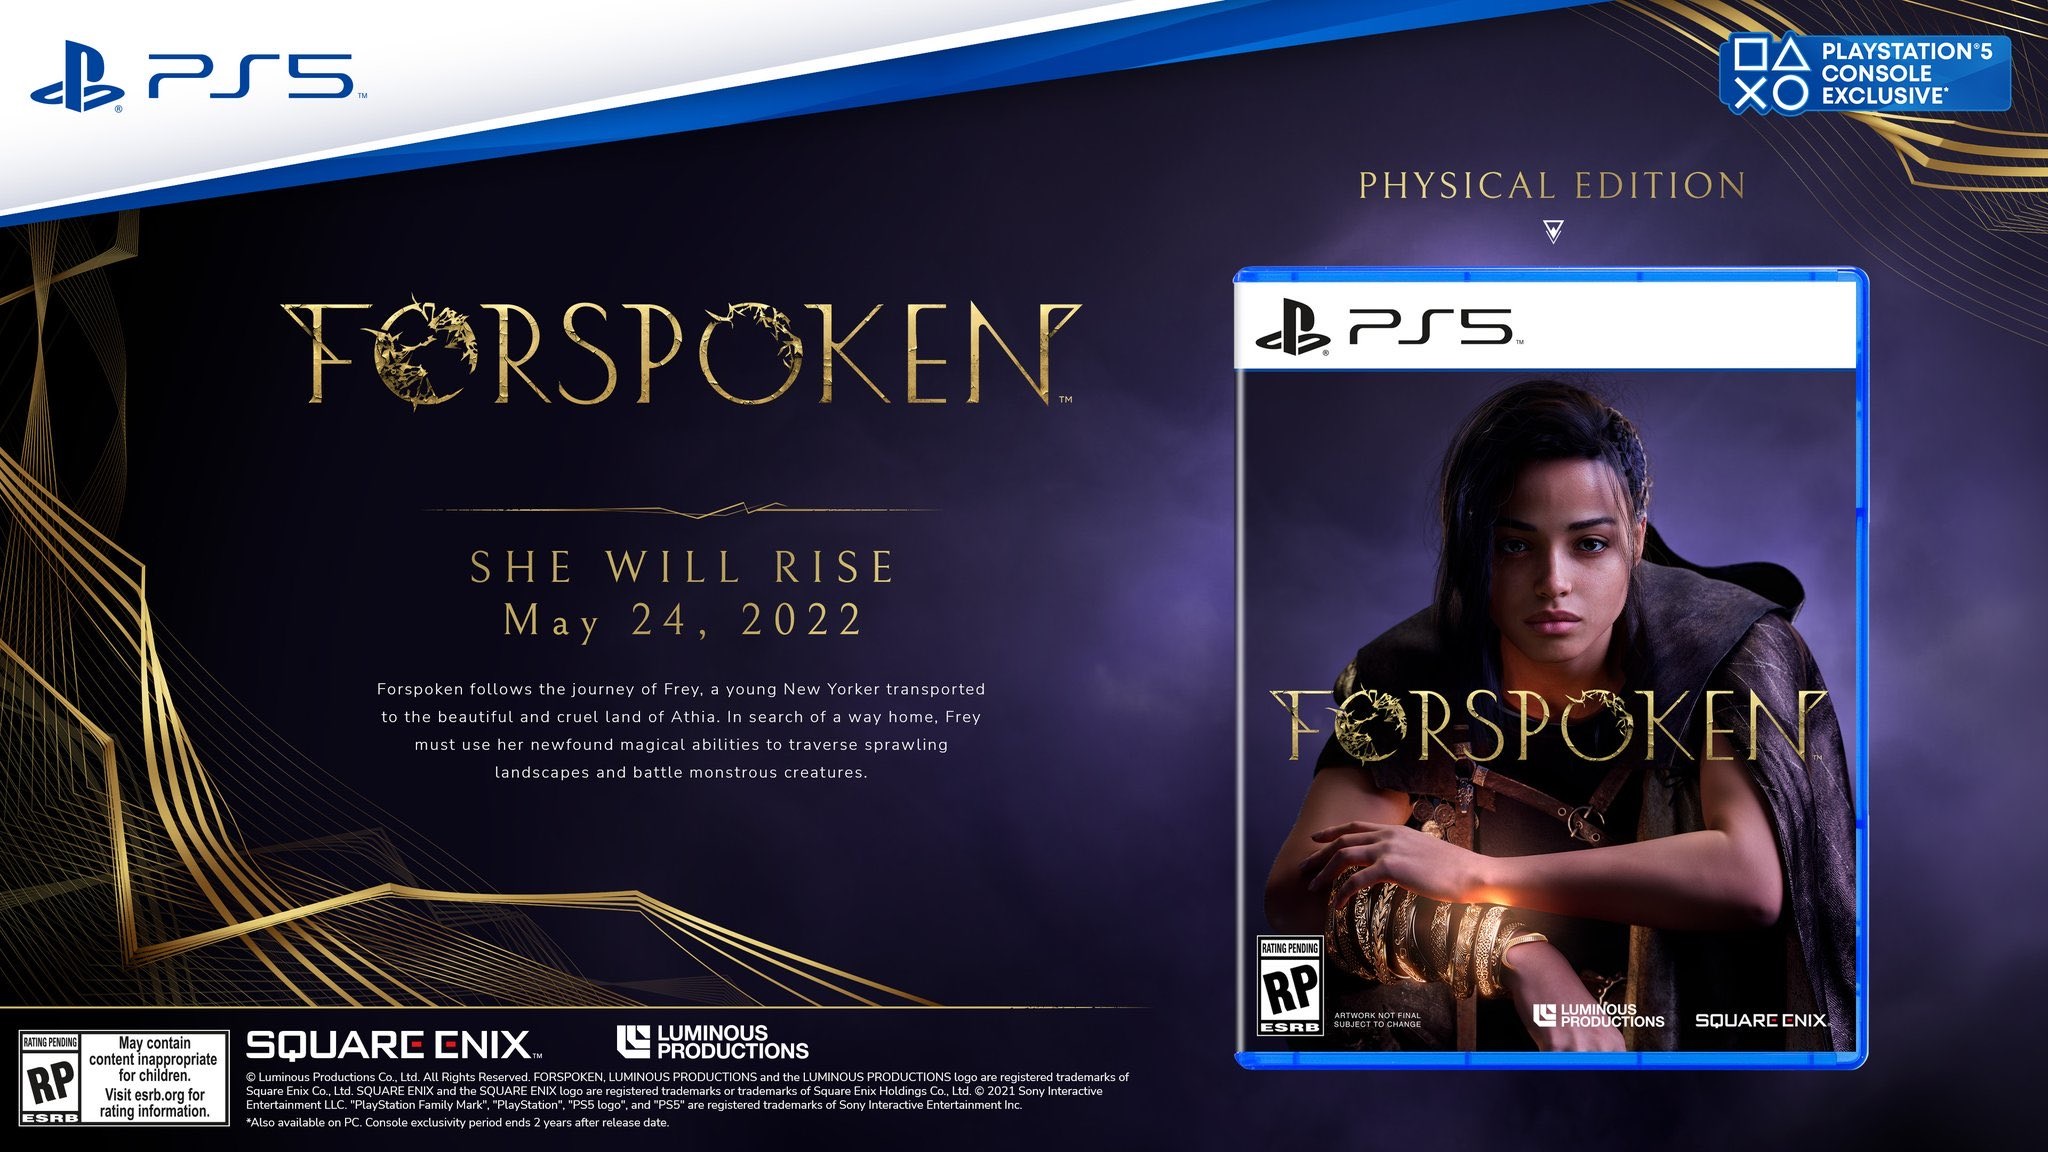 Forspoken Release Delayed to January 2023 - Siliconera